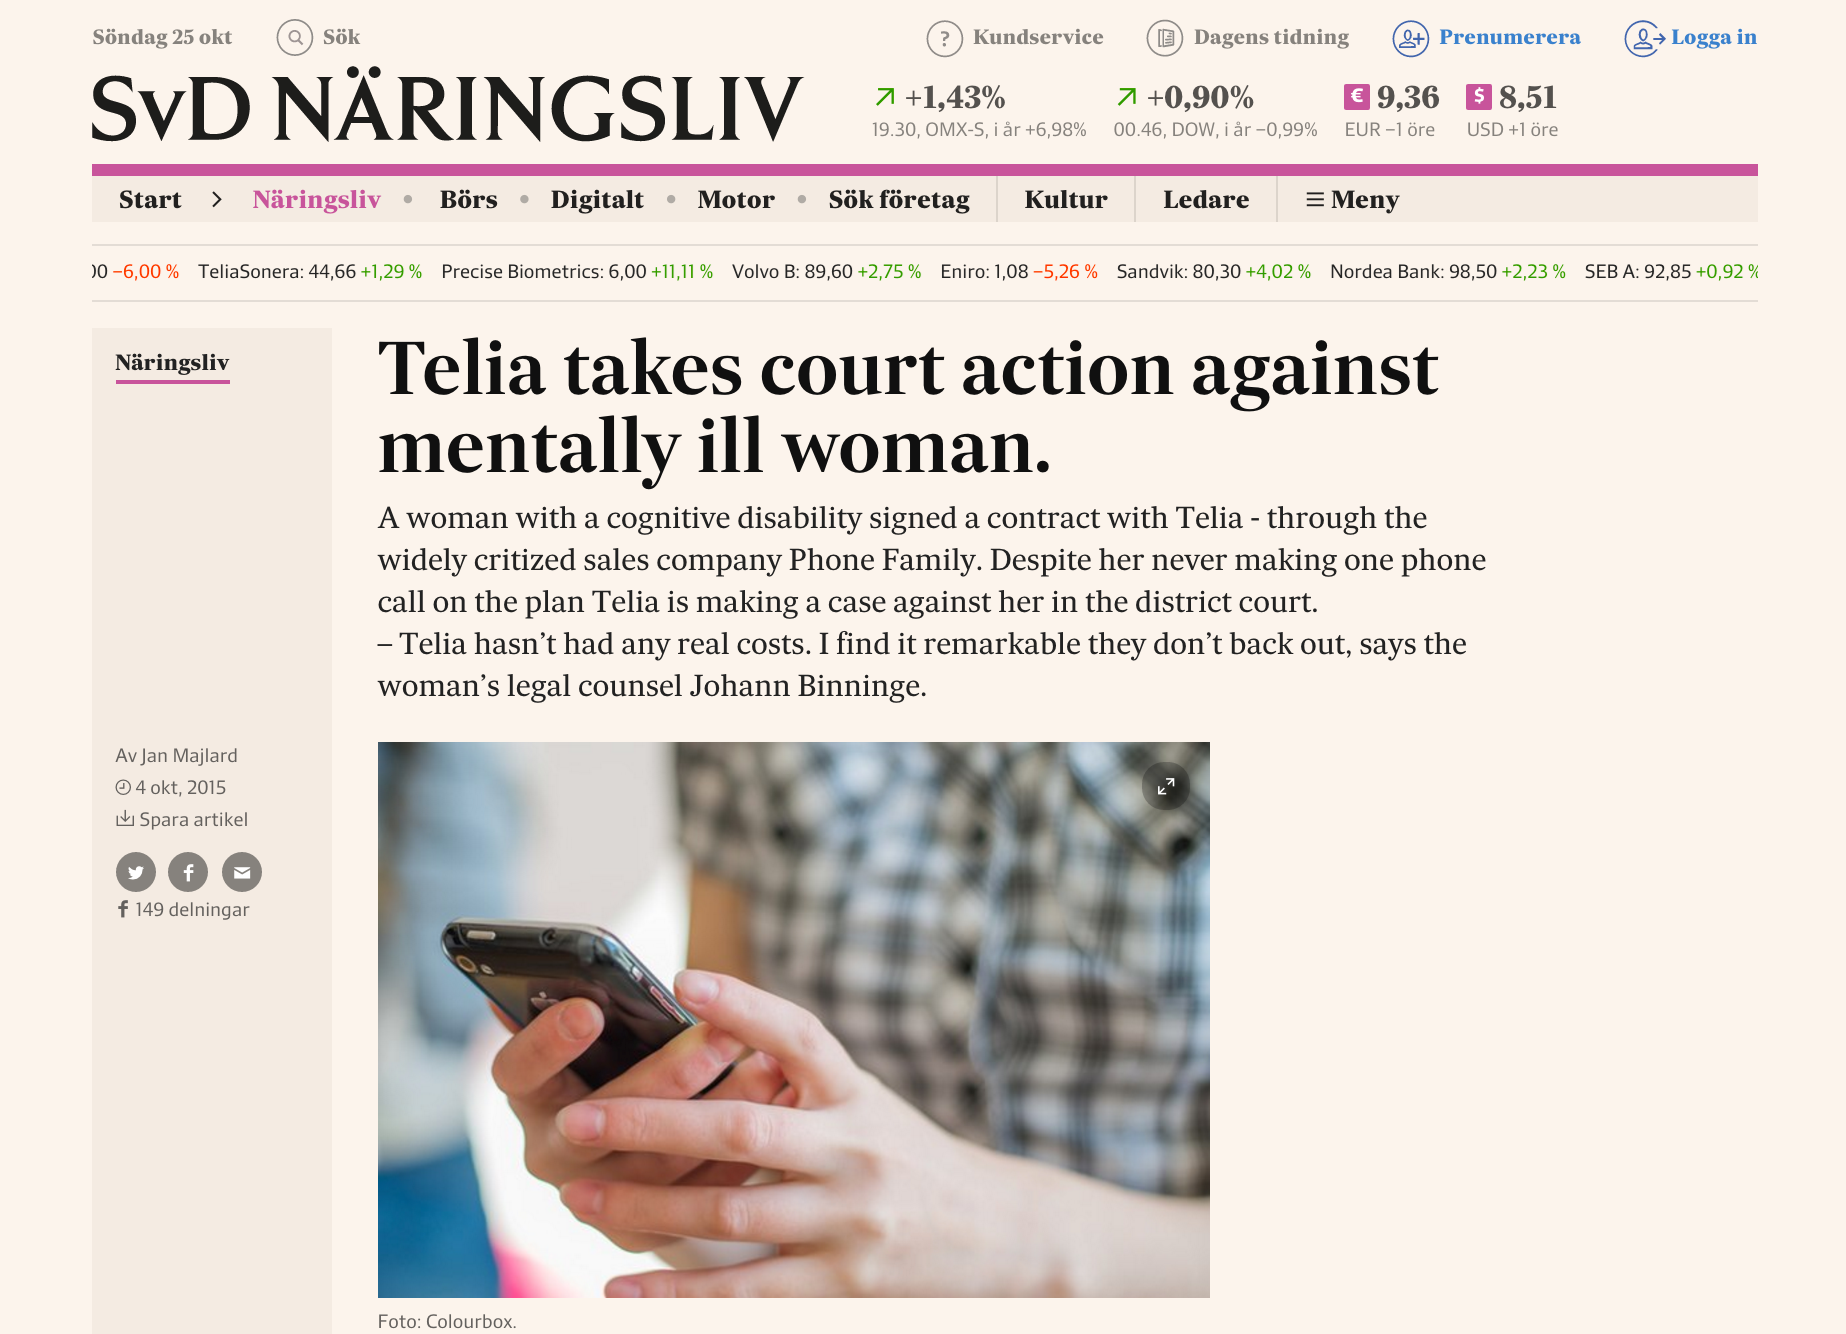 Screenshot of newspaper article headlined "Telia takes court action against mentally ill woman"